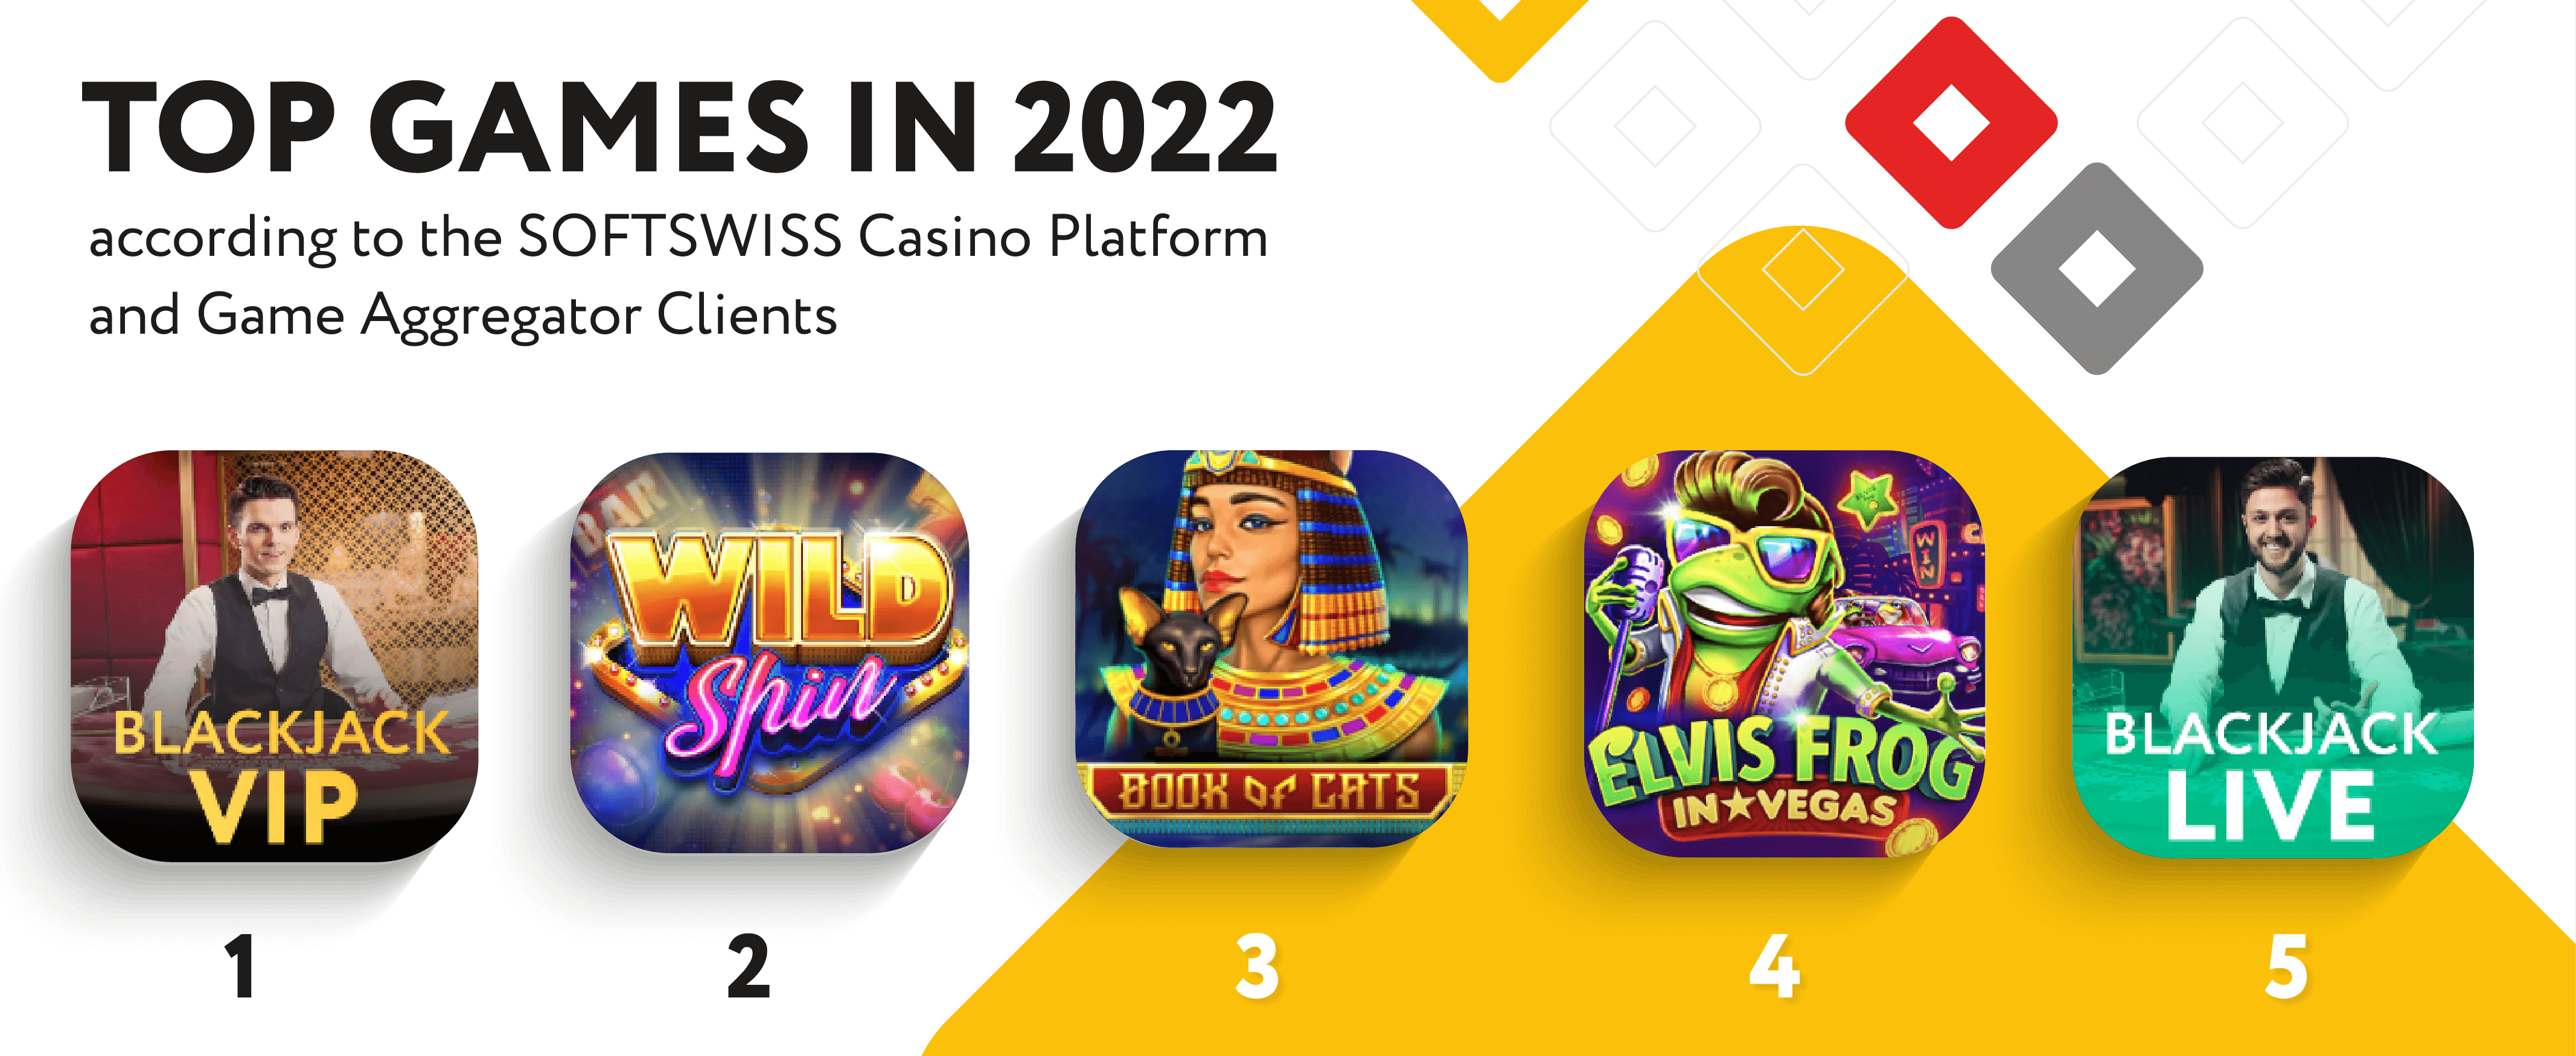 igaming-casino-sportsbook-top-games-2022